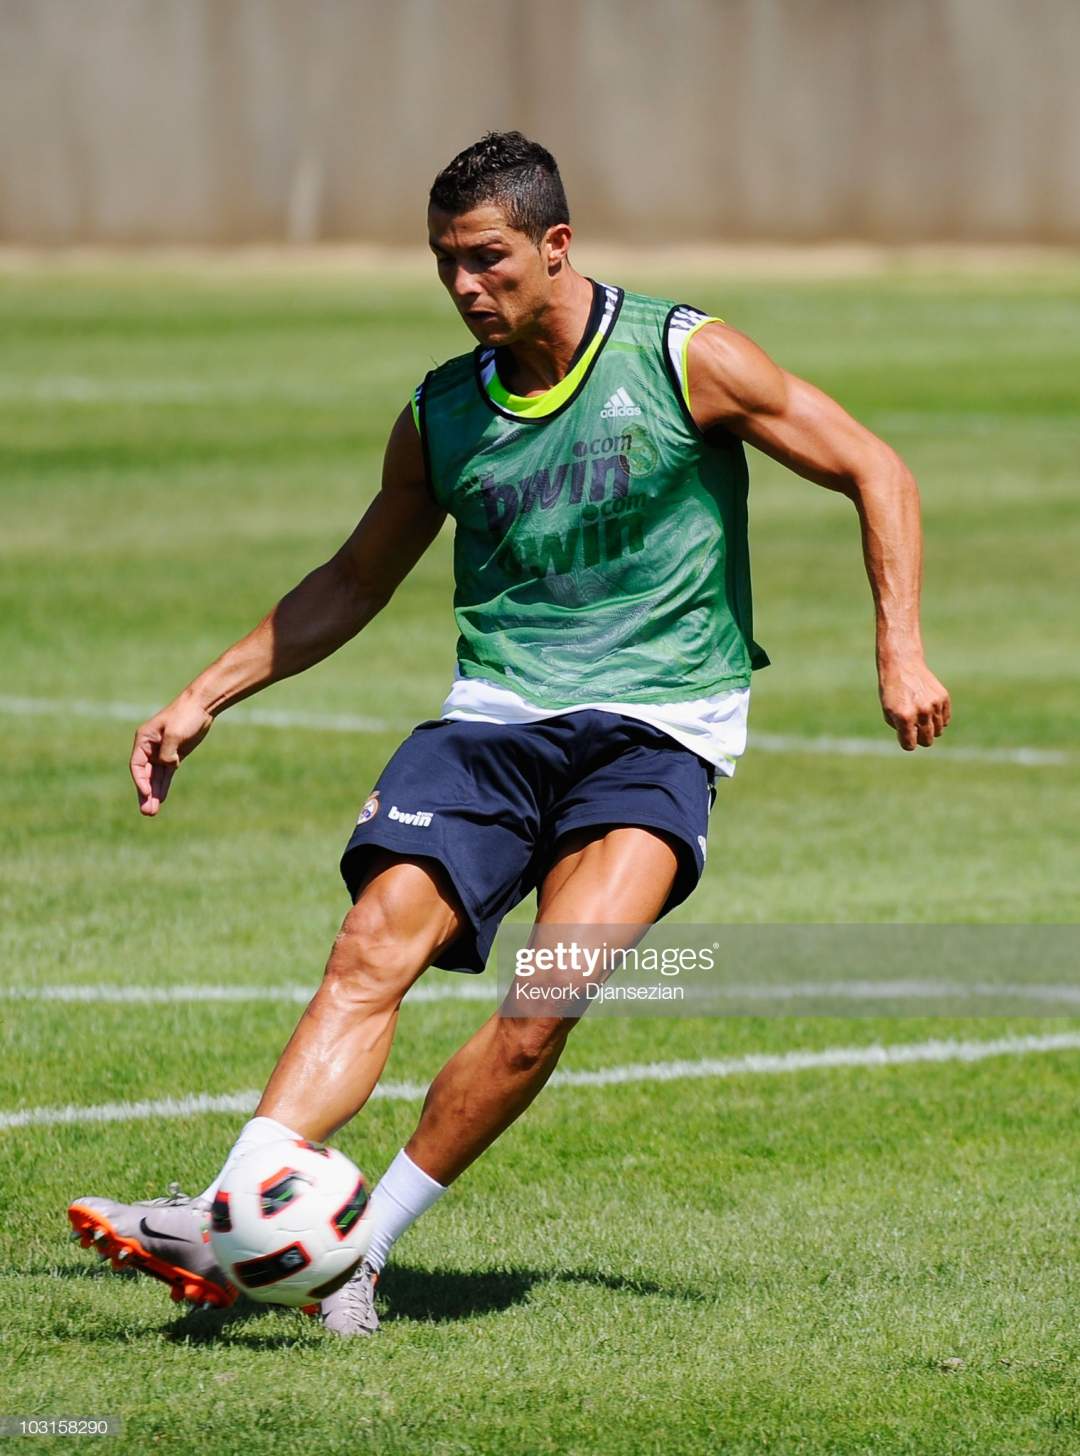 Cristaino Ronaldo trains with his new coach who is a Nigerian and retired Olympics medalist (photo/video)